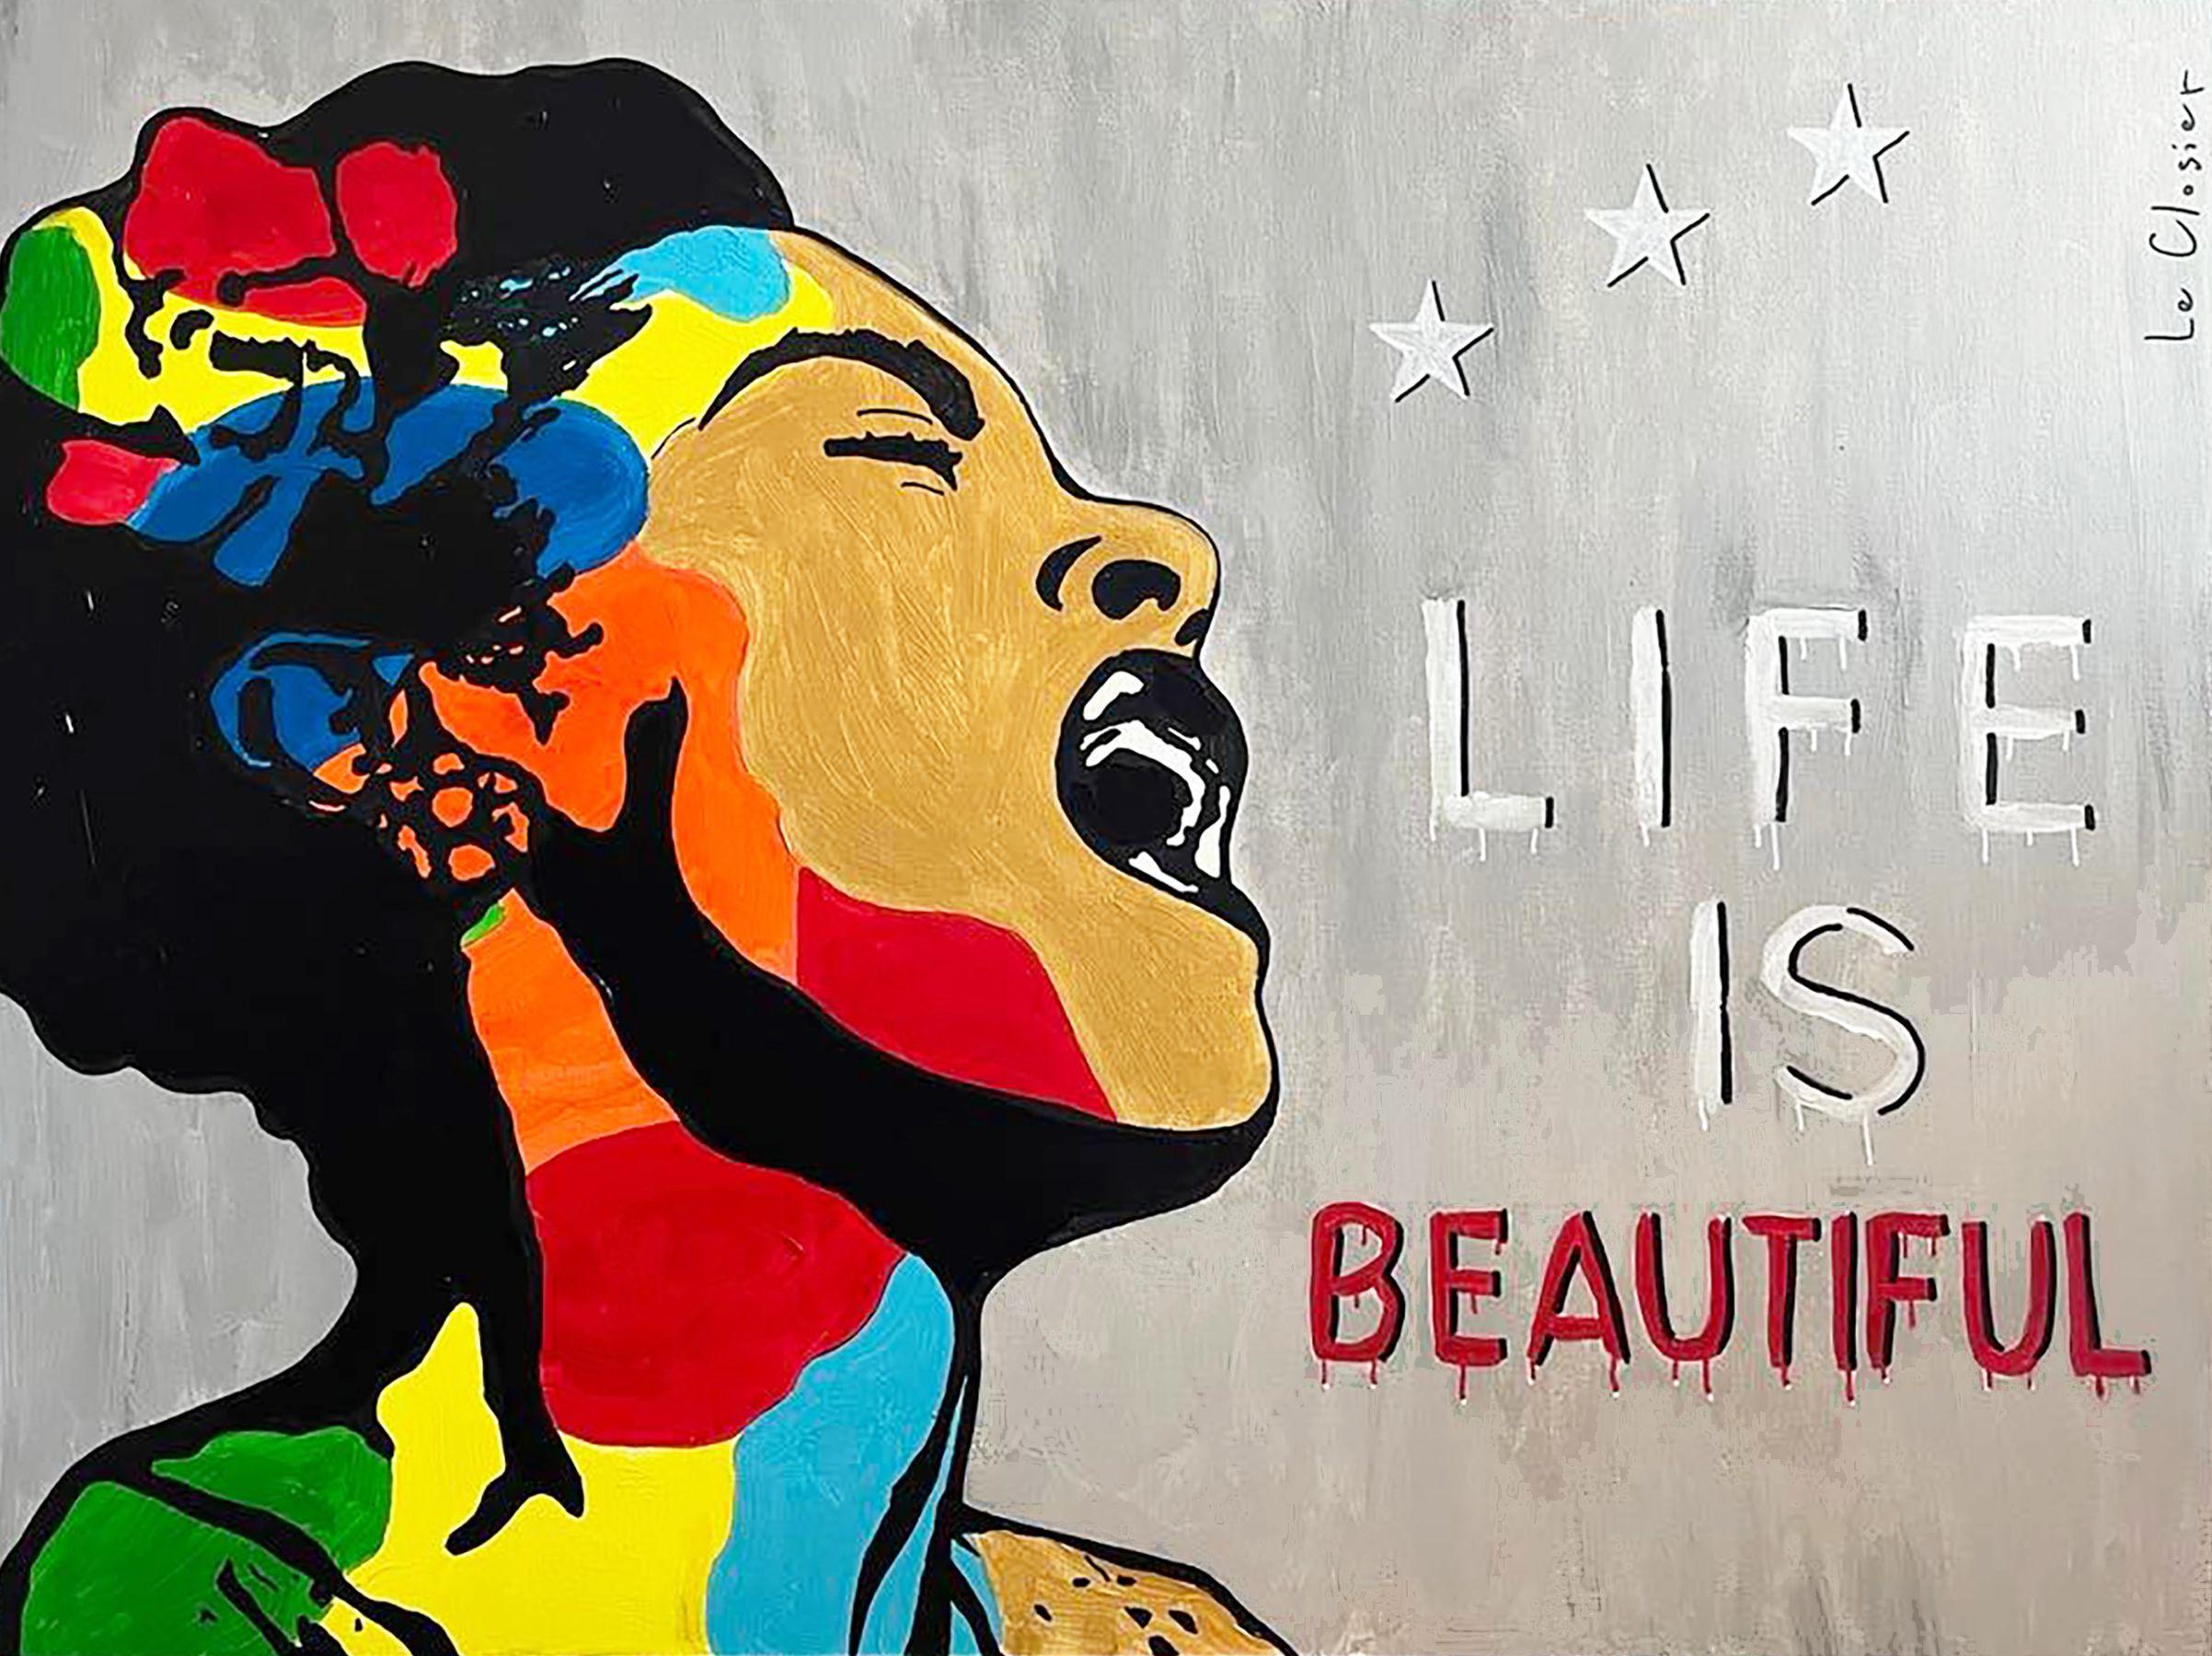 LIFE IS BEAUTIFUL IV  Homage to street artist Banksy (with Billie Holiday).  Acrylic and oil on canvas.  30in x 40in (76cm x 101cm).  Ready to hang. :: Painting :: Pop-Art :: This piece comes with an official certificate of authenticity signed by